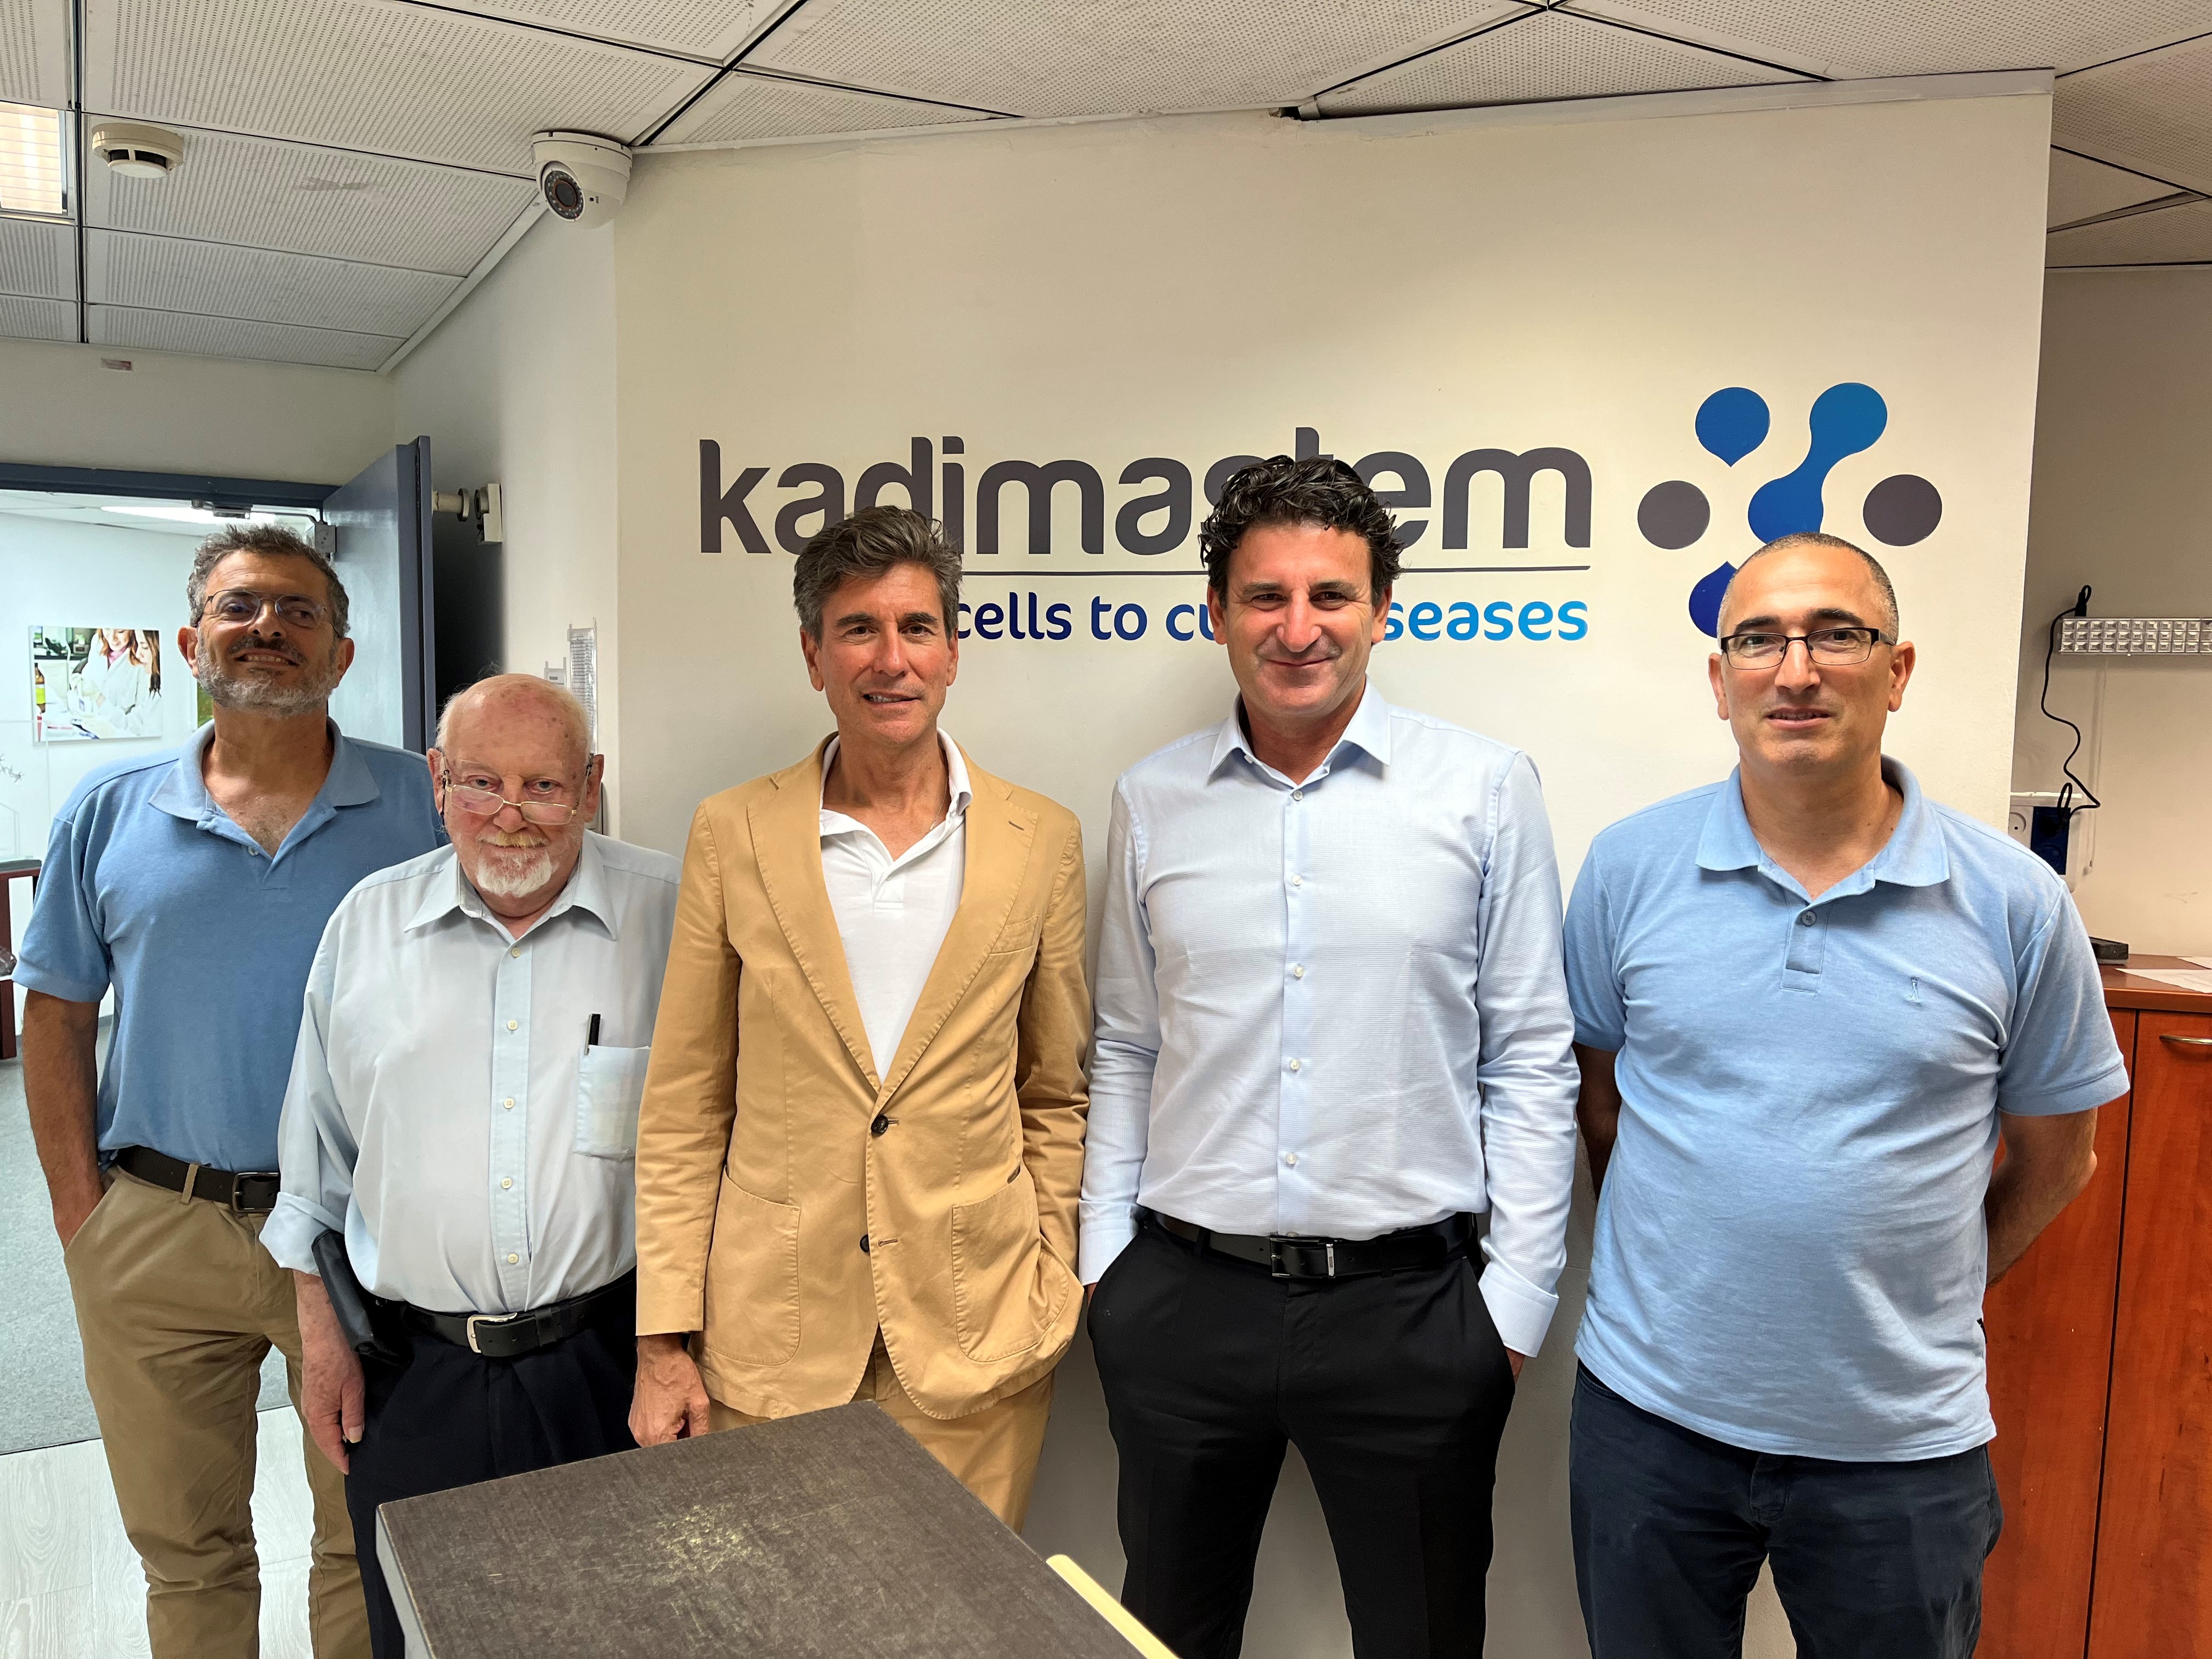 From right to left: Dr. Kfir Molakandov, Asaf Shiloni, Anthony Japour, Prof. Michel Revel and Dr. Arik Hasson